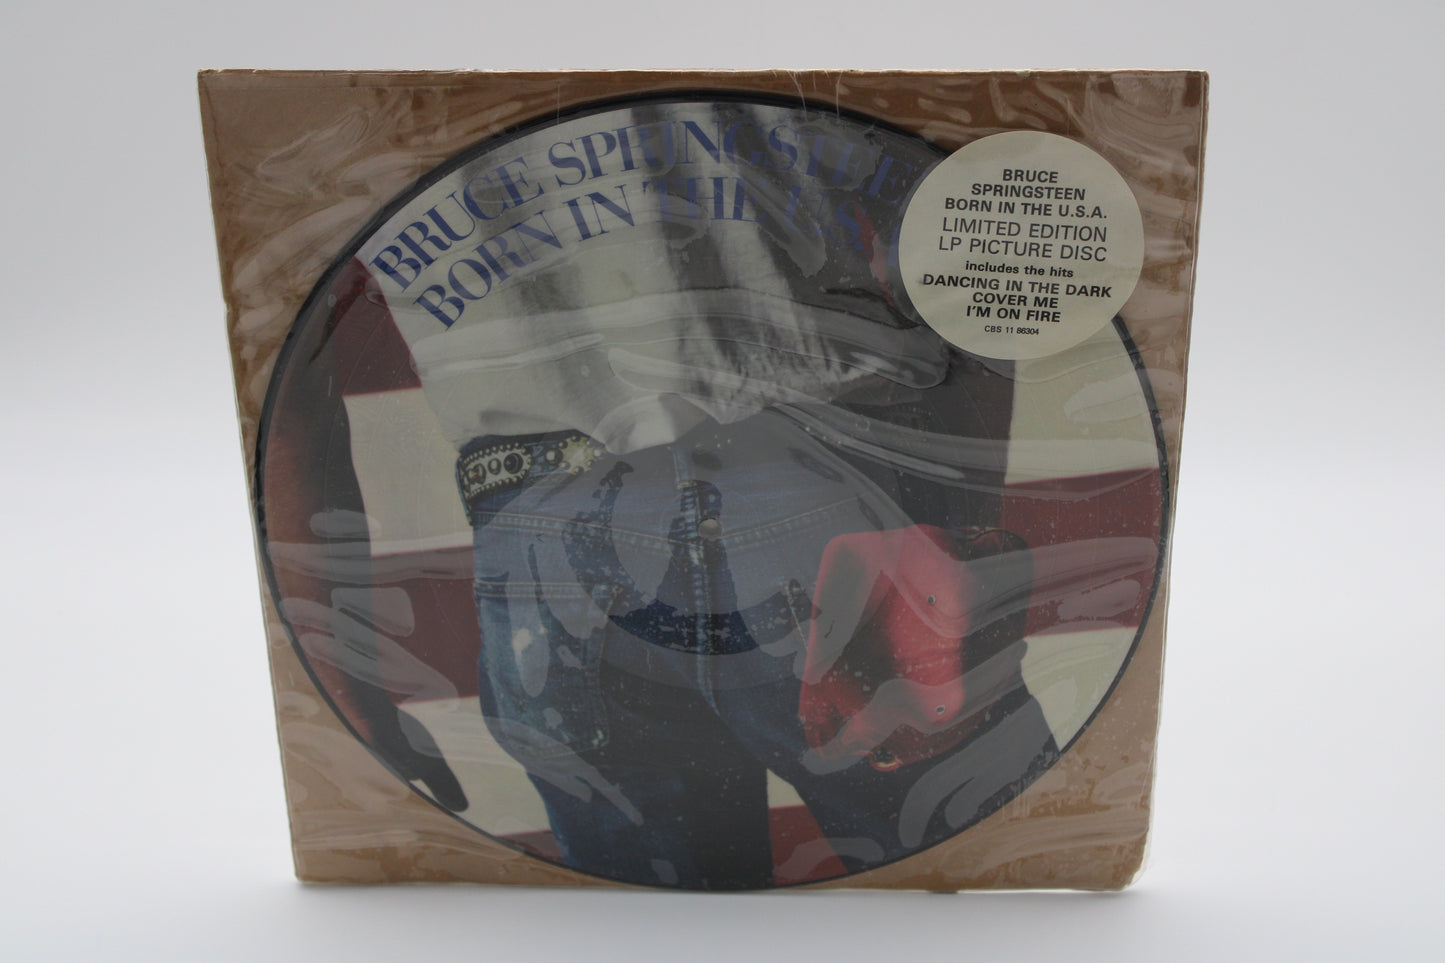 Bruce Springsteen Born in the USA LP Vinyl 12” Picture Disc LTD. Edition Collectible